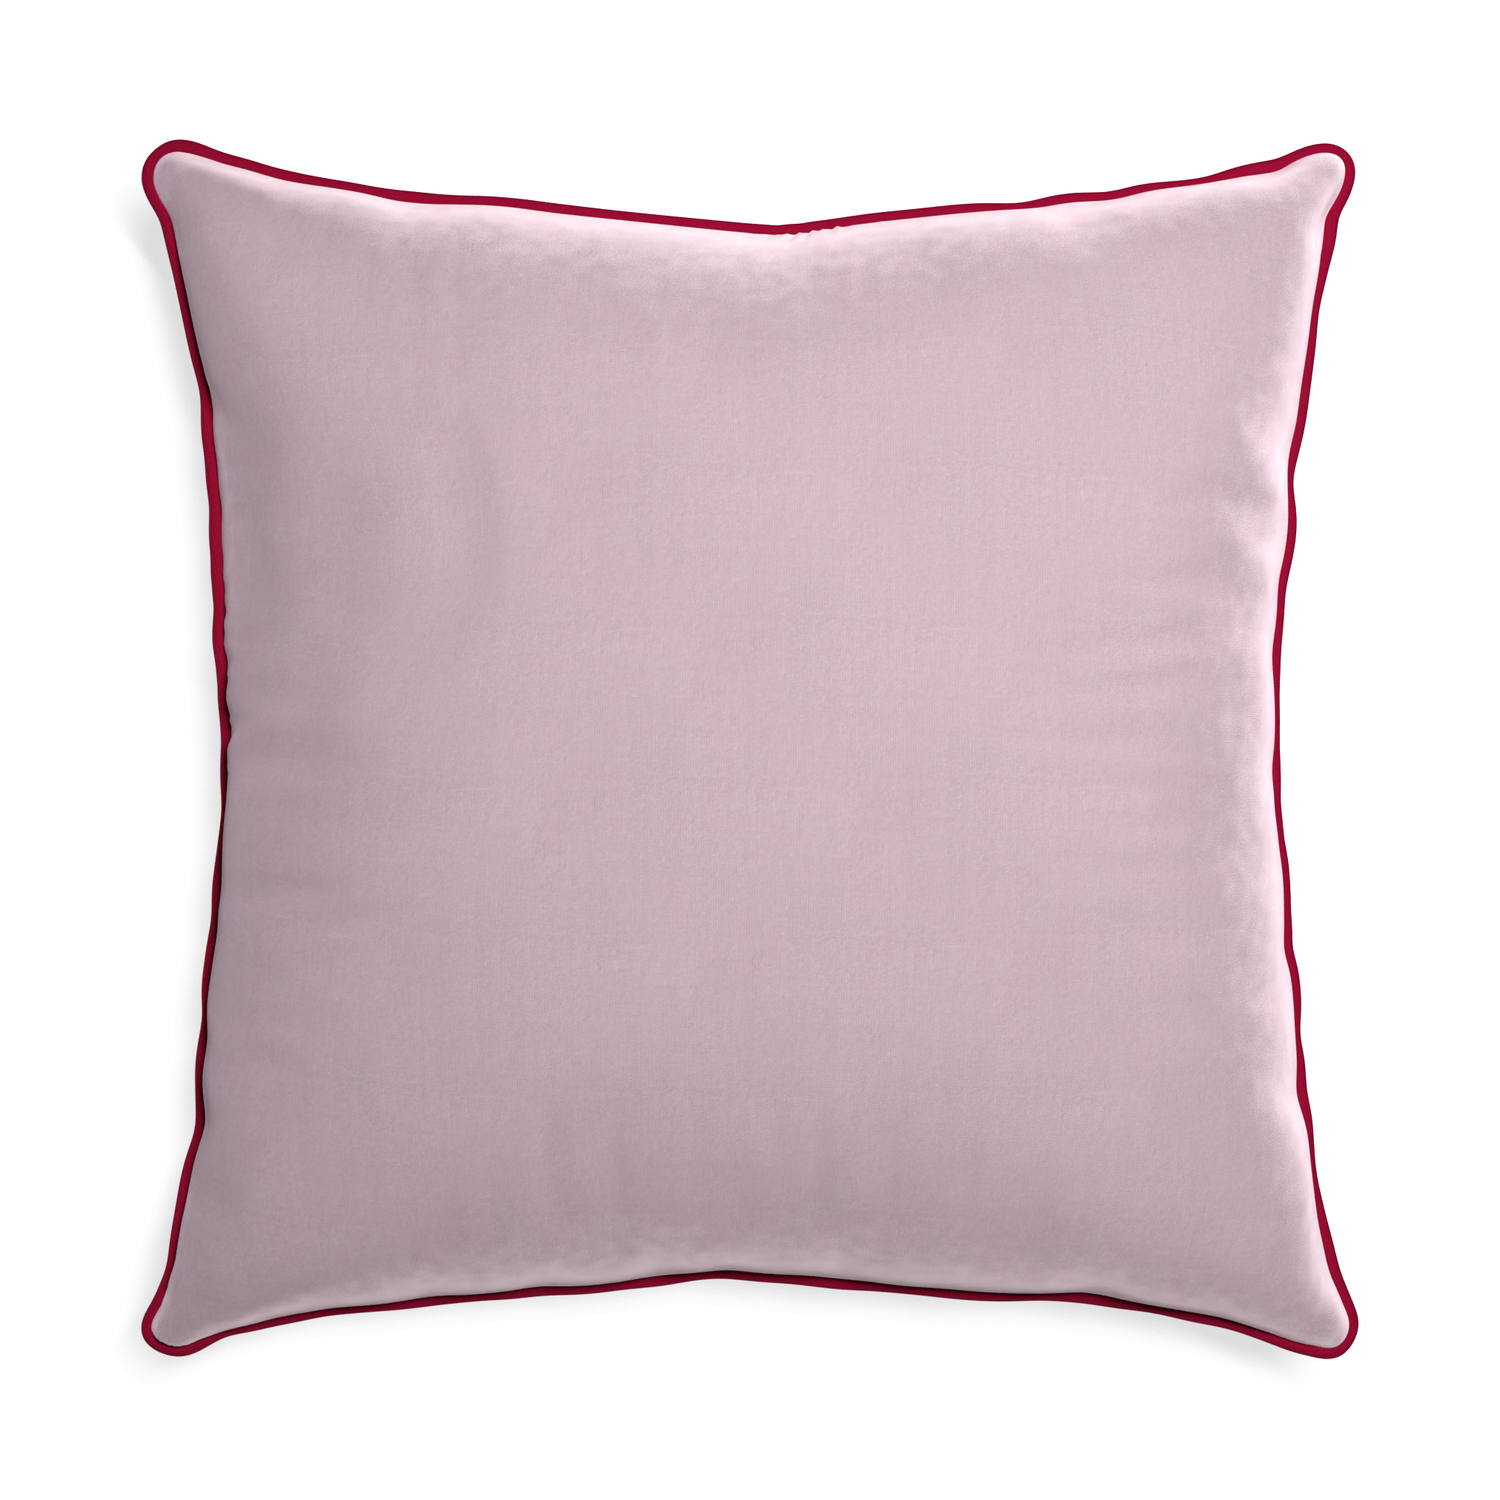 Euro-sham lilac velvet custom lilacpillow with raspberry piping on white background